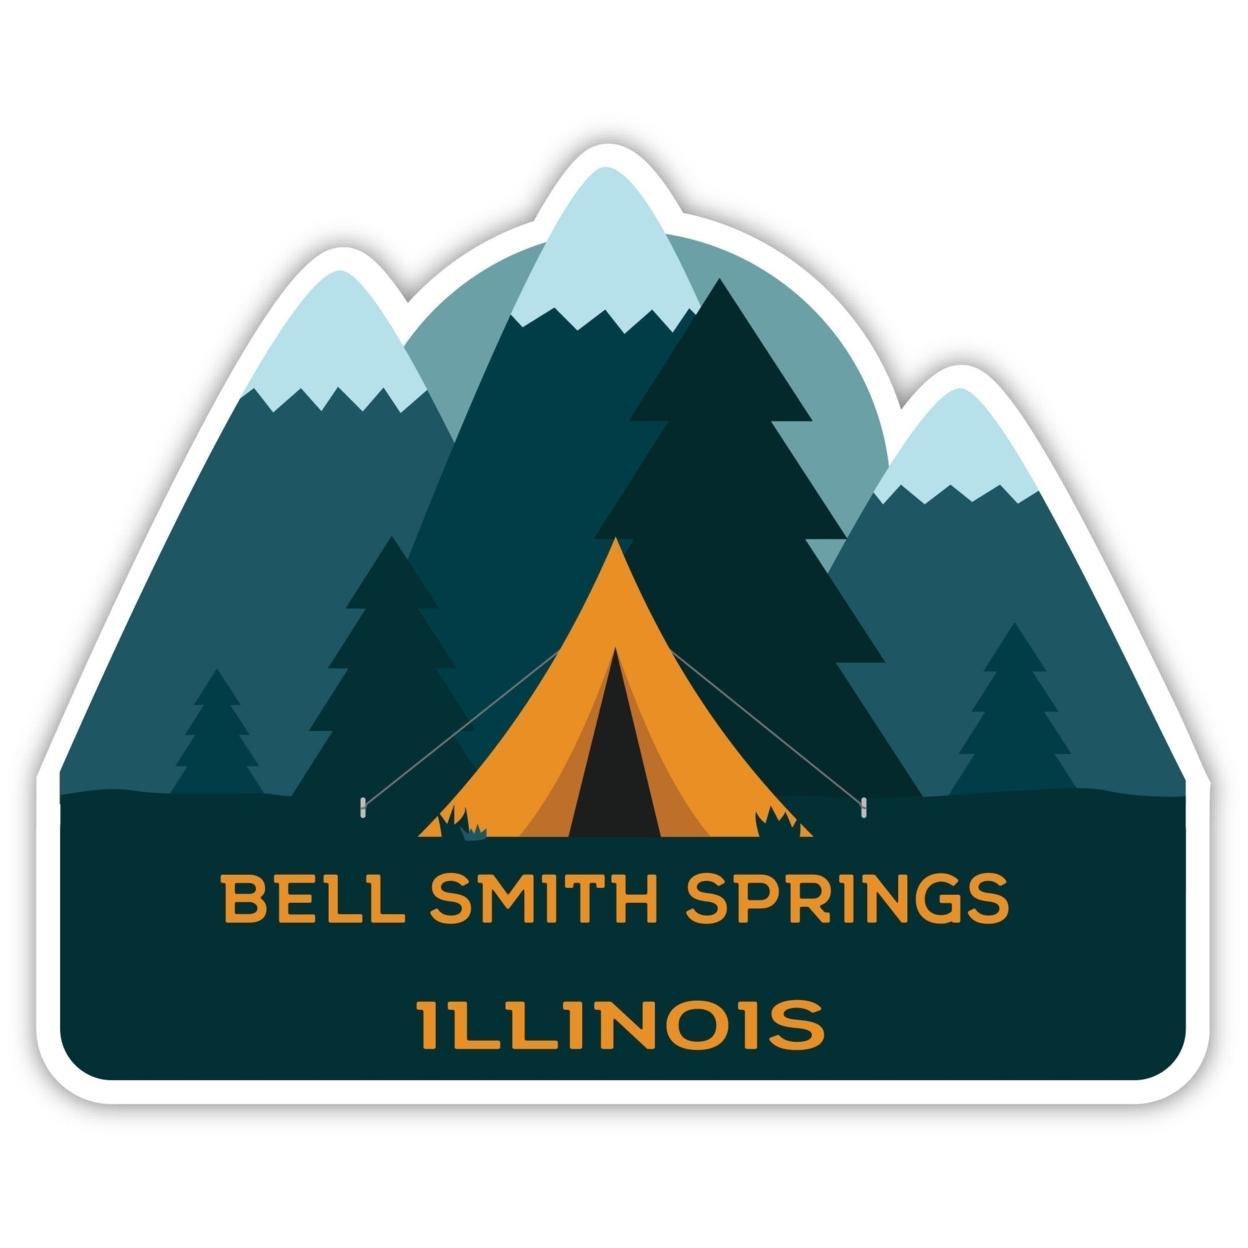 Bell Smith Springs Illinois Souvenir Decorative Stickers (Choose Theme And Size) - 4-Pack, 4-Inch, Bear